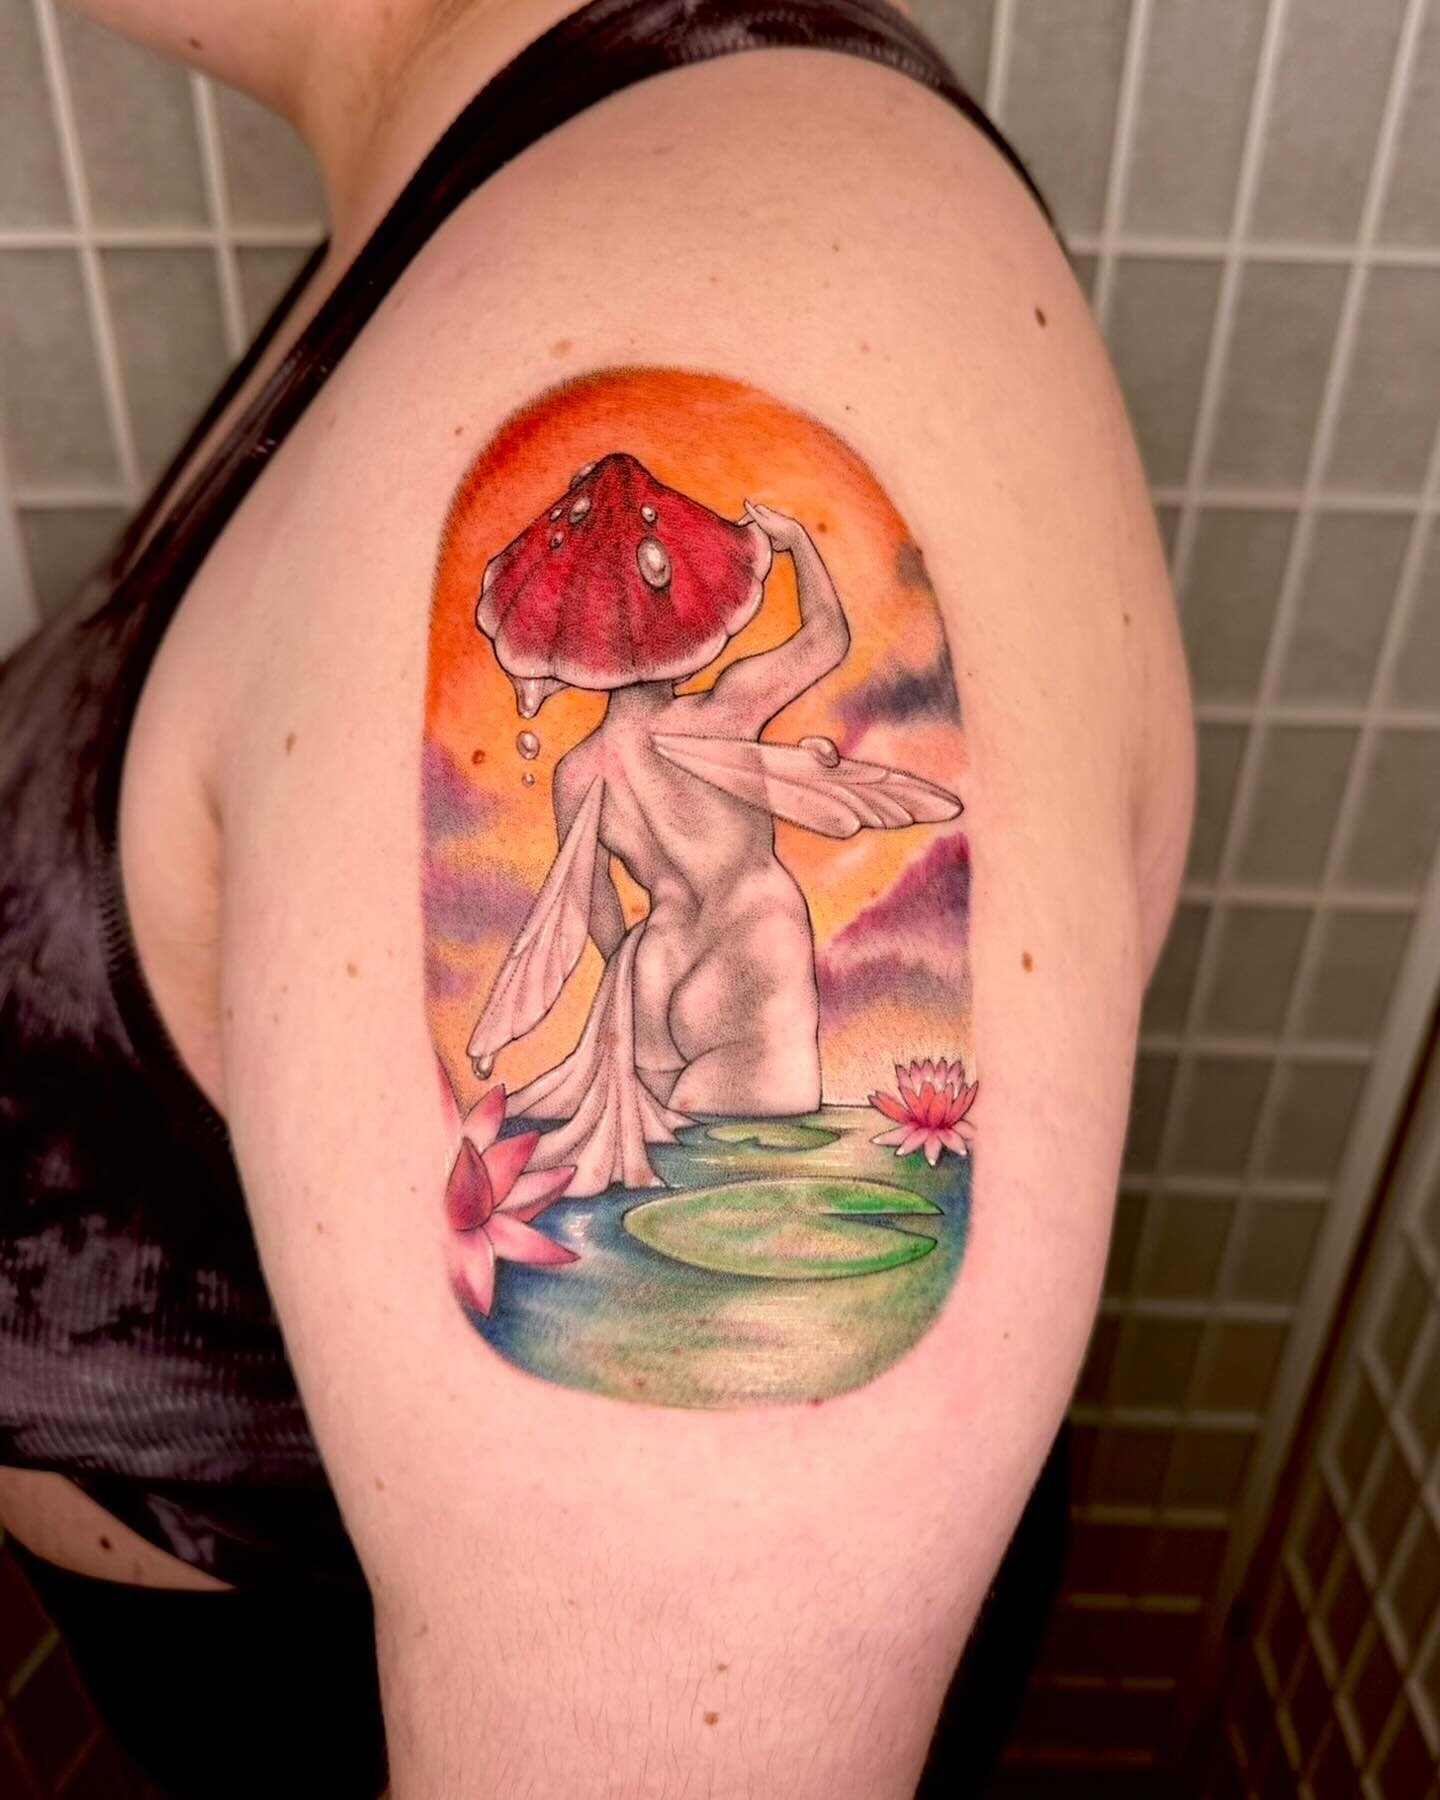 First tattoo of the Year!🍄🌅
Thank you Saline for claiming this flash piece! So excited that we got to see it become your first tattoo! What a great way to start off the year with a magical mushroom fairy 🧚&zwj;♂️ . Can&rsquo;t wait to see what 202